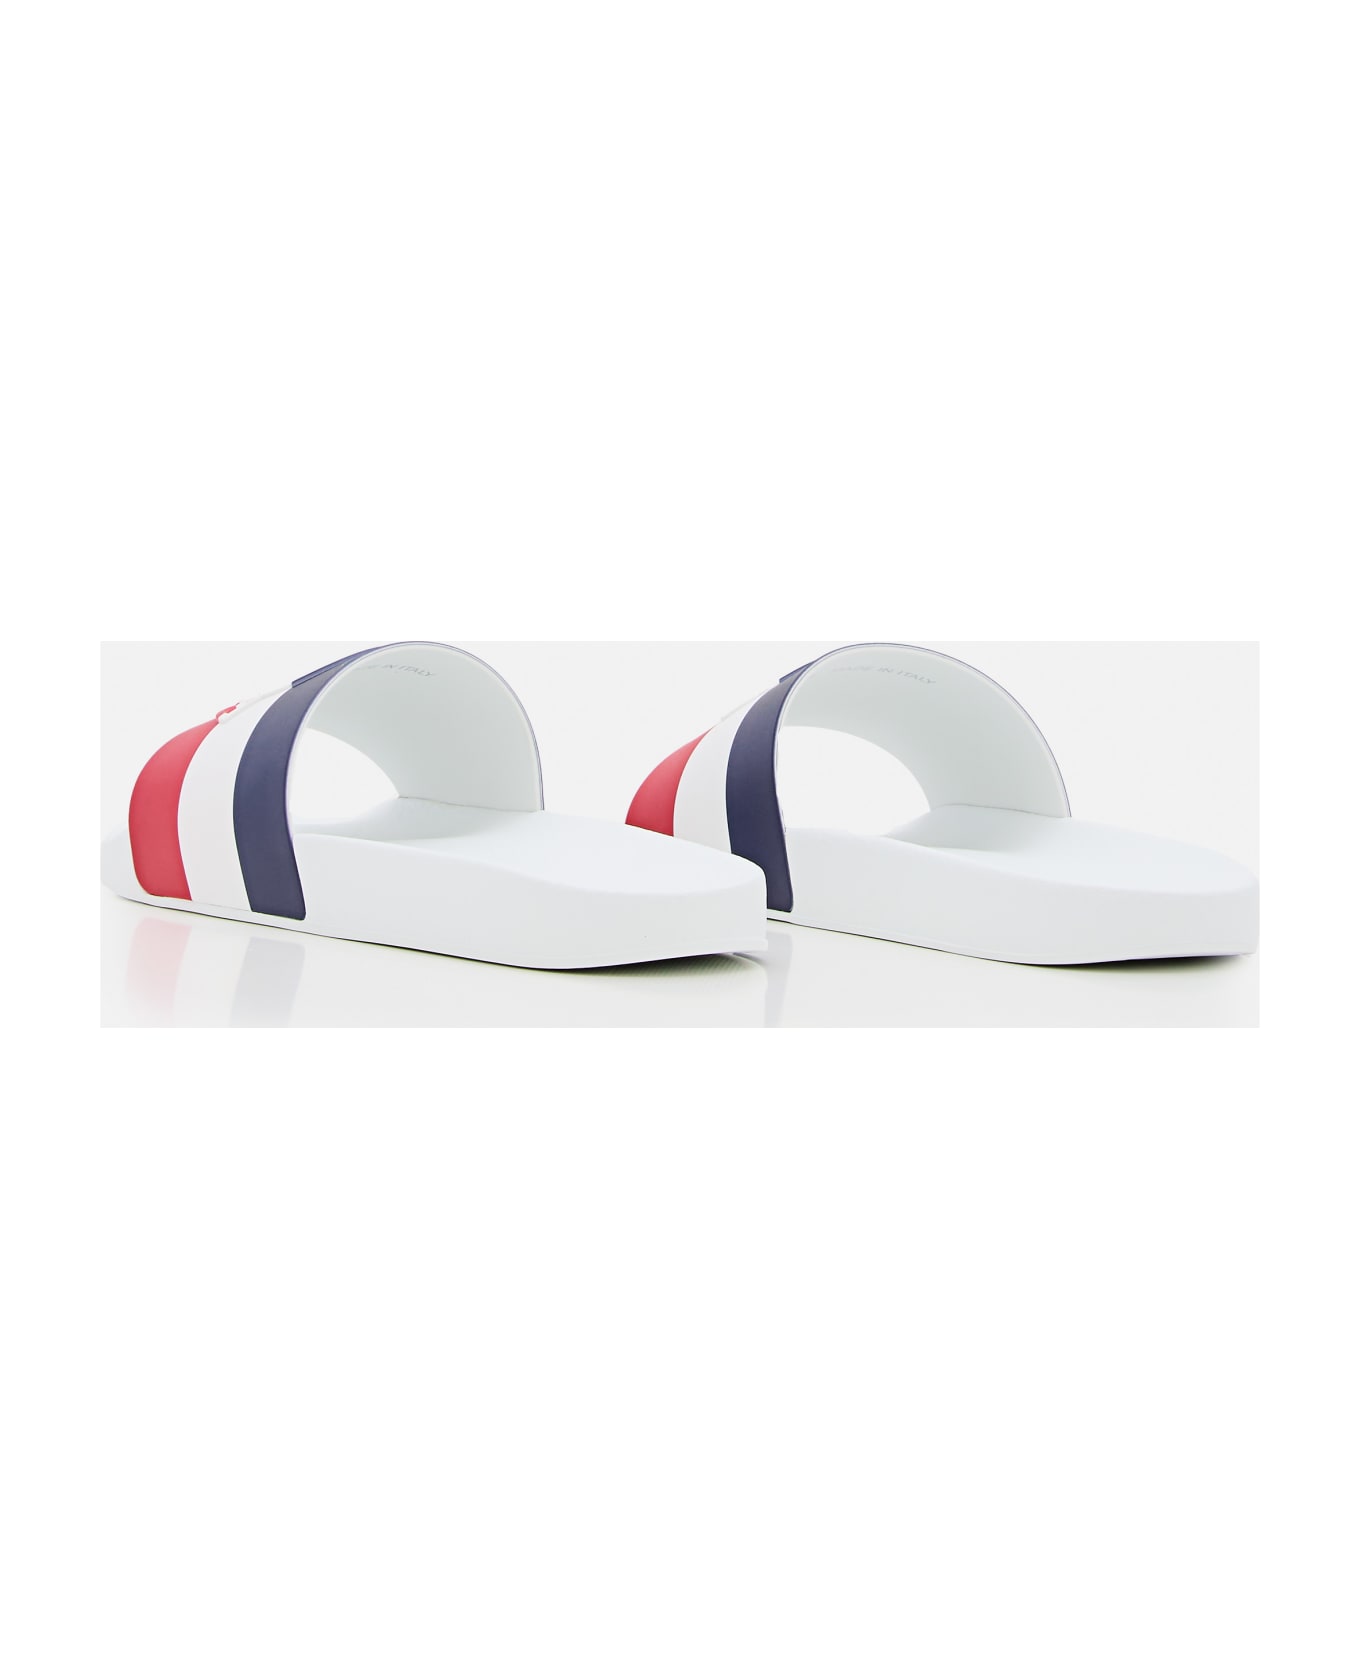 Moncler Basile Sandals - White その他各種シューズ